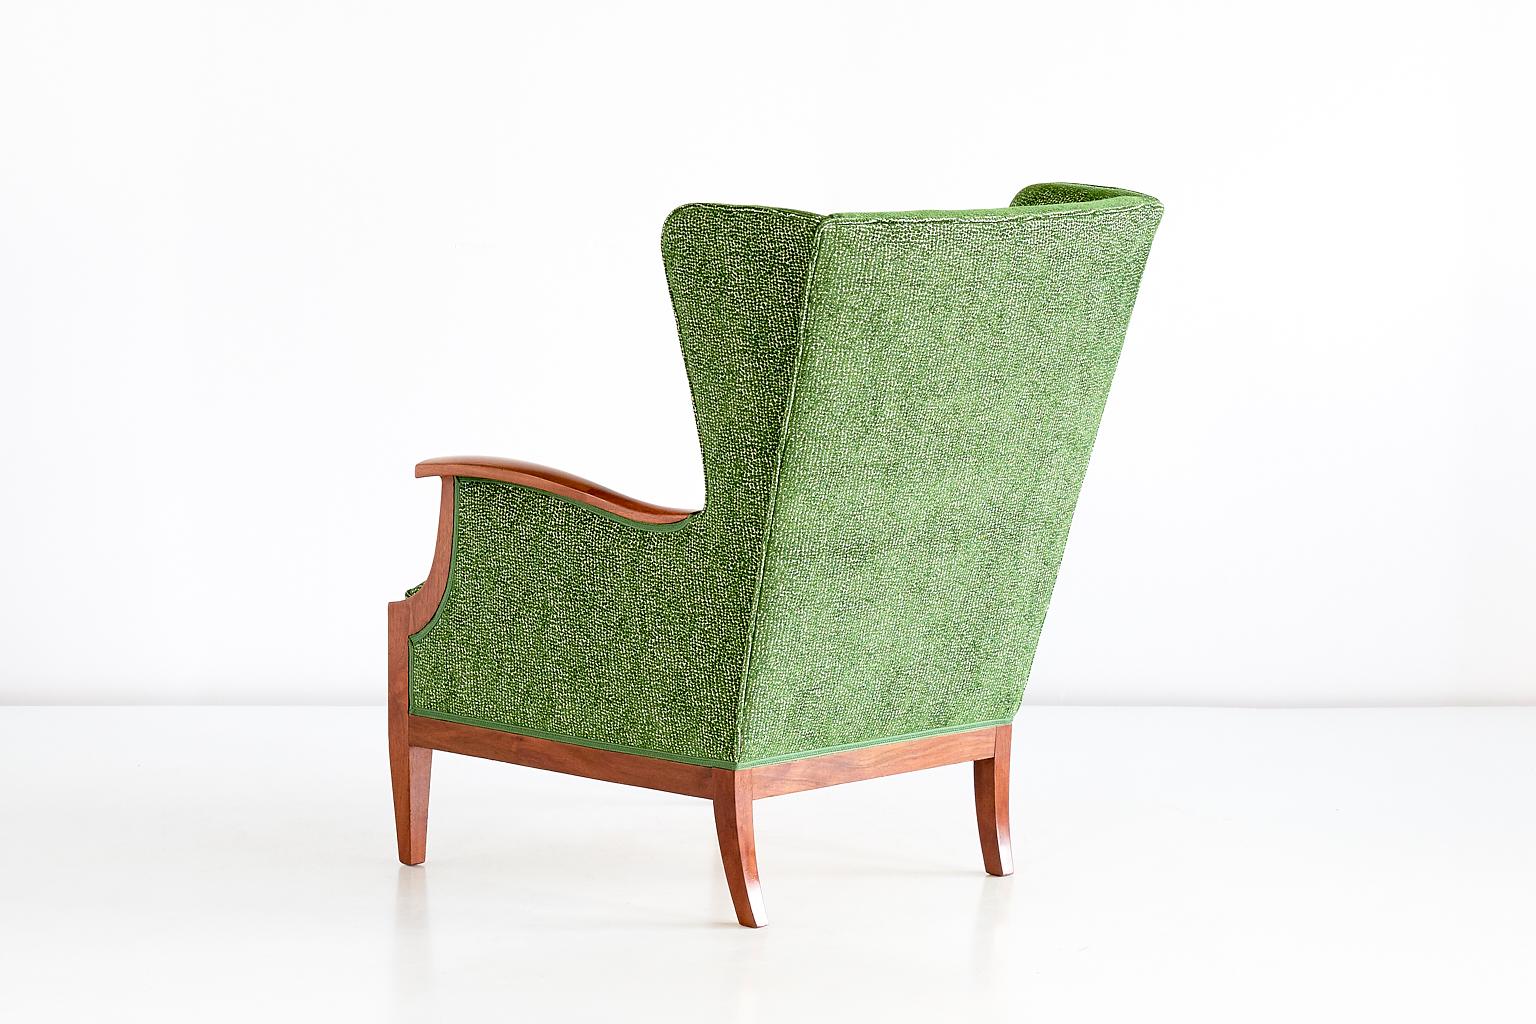 Chenille Frits Henningsen Wingback Chair in Walnut and Green Rubelli Fabric, 1930s For Sale